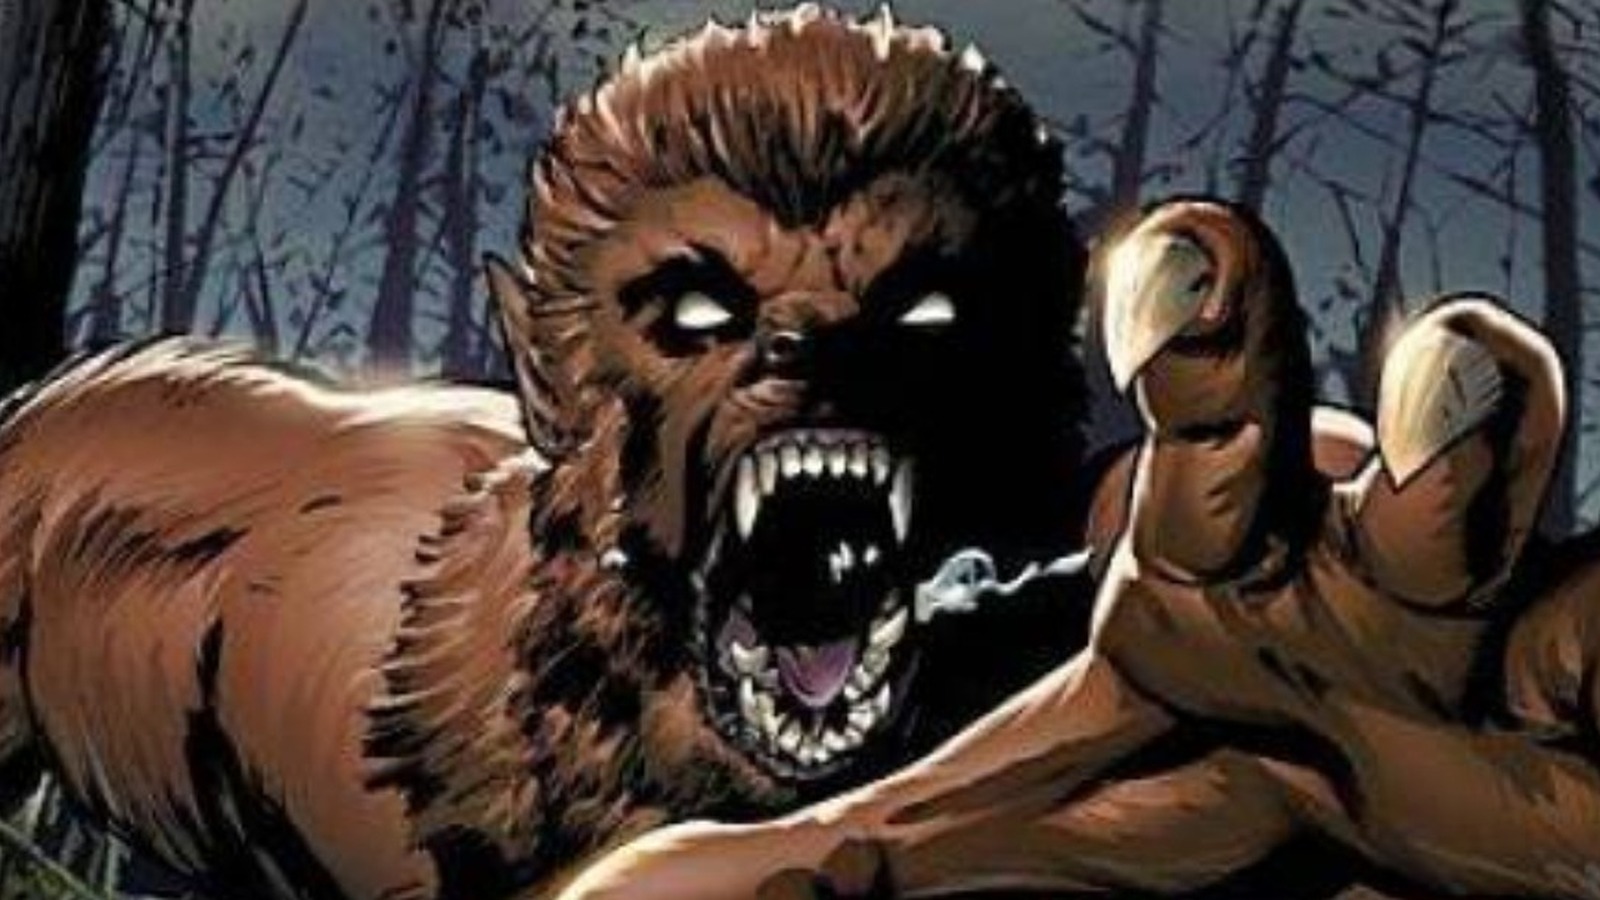 Werewolf by Night Review: Not a Total MCU Transformation, but Fun